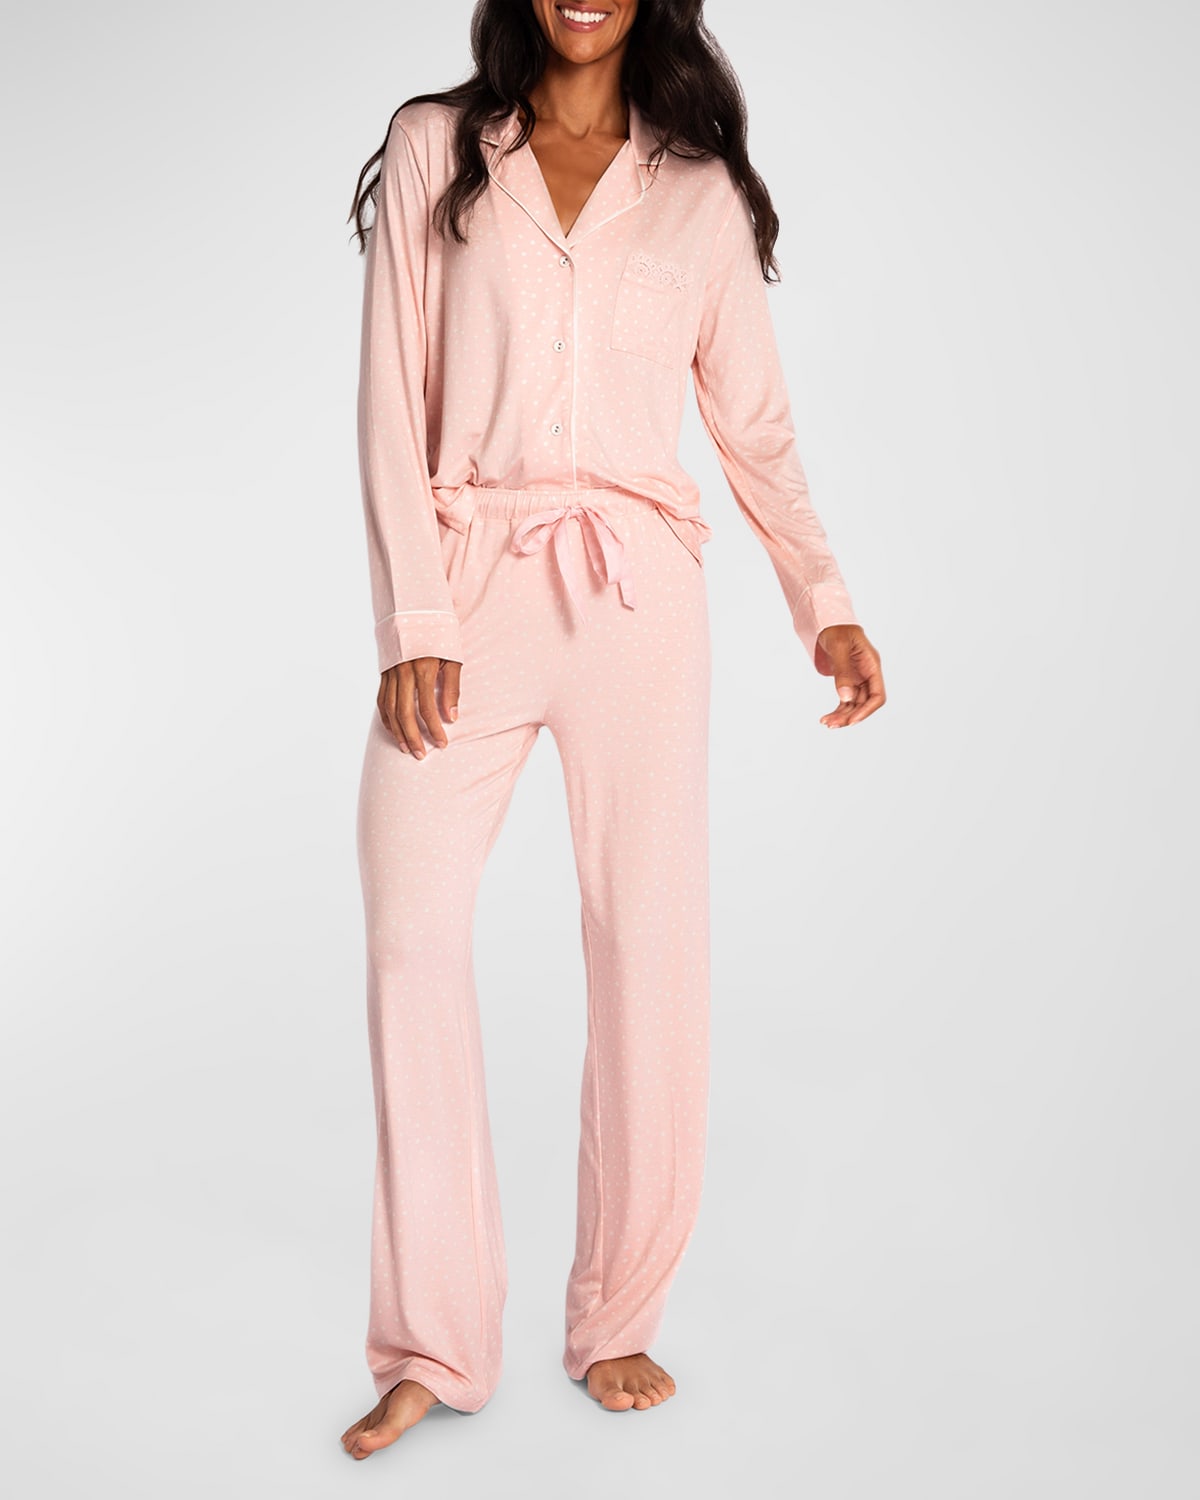 Pj Salvage Love And Lace Star-print Pajama Set In Pink Tint